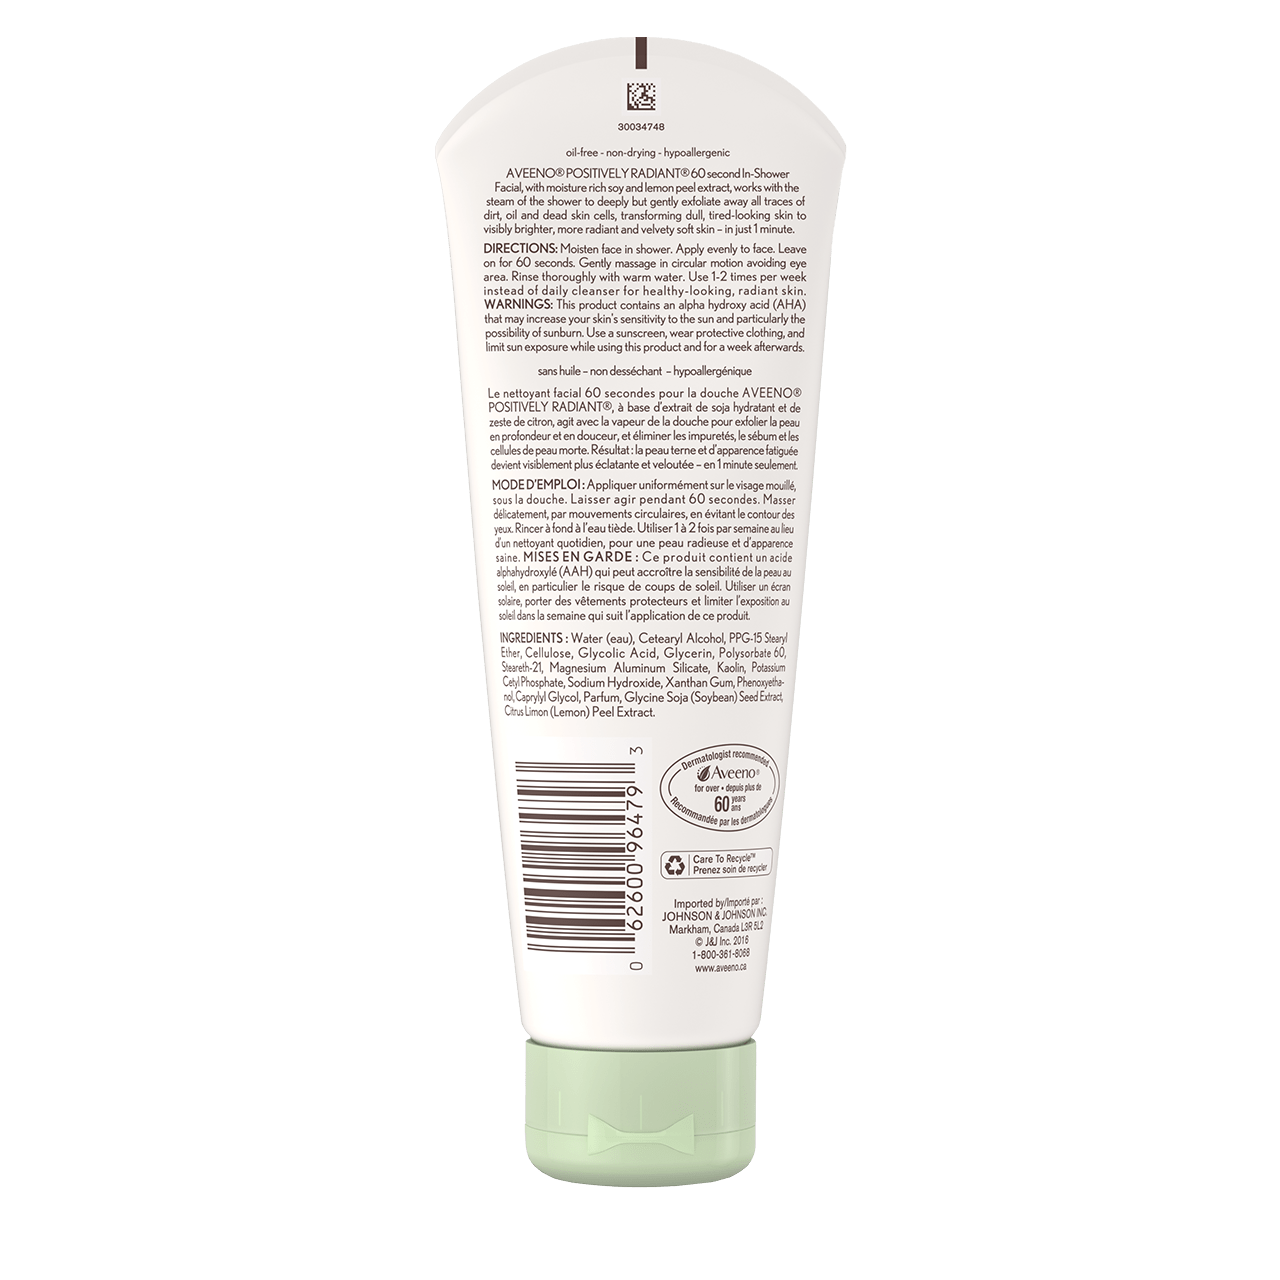 AVEENO® POSITIVELY RADIANT® 60 Second In-shower Facial, 141g tube, back label